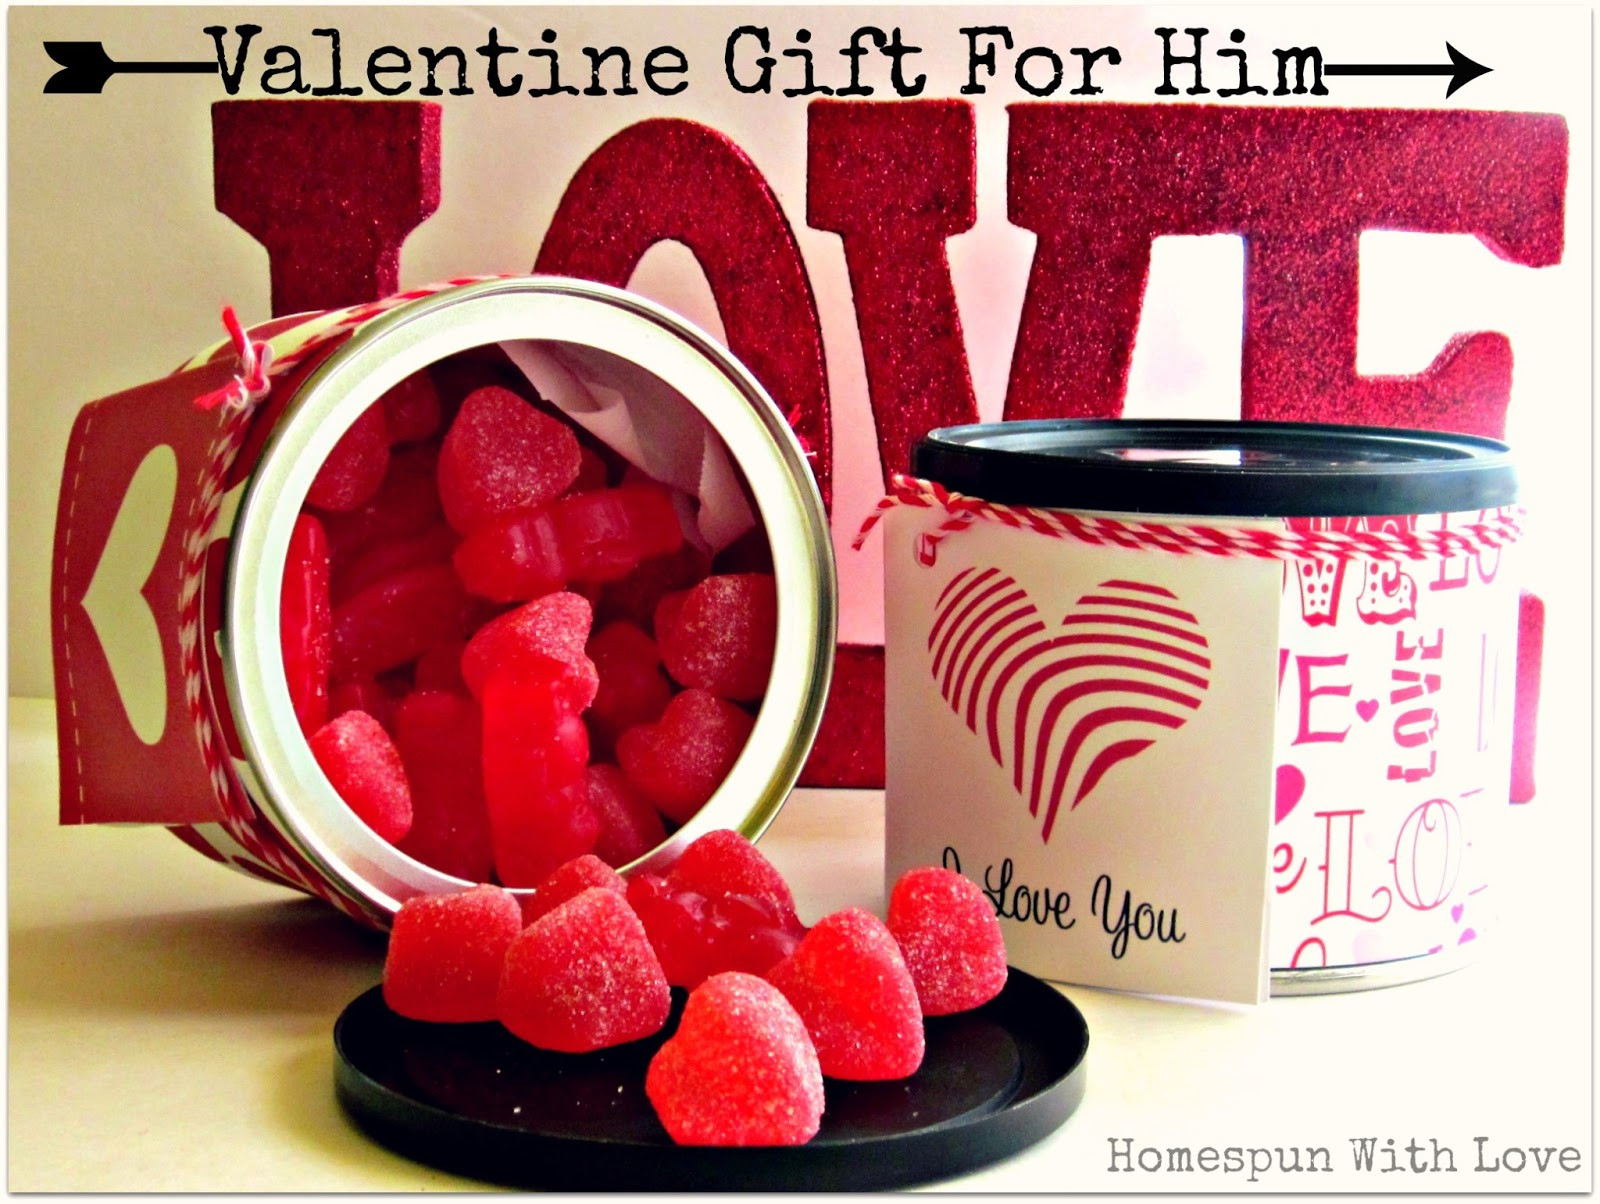 Valentines Day Photo Gift Ideas
 5 Romantic Valentines Day Gift Ideas For Him – Ezyshine